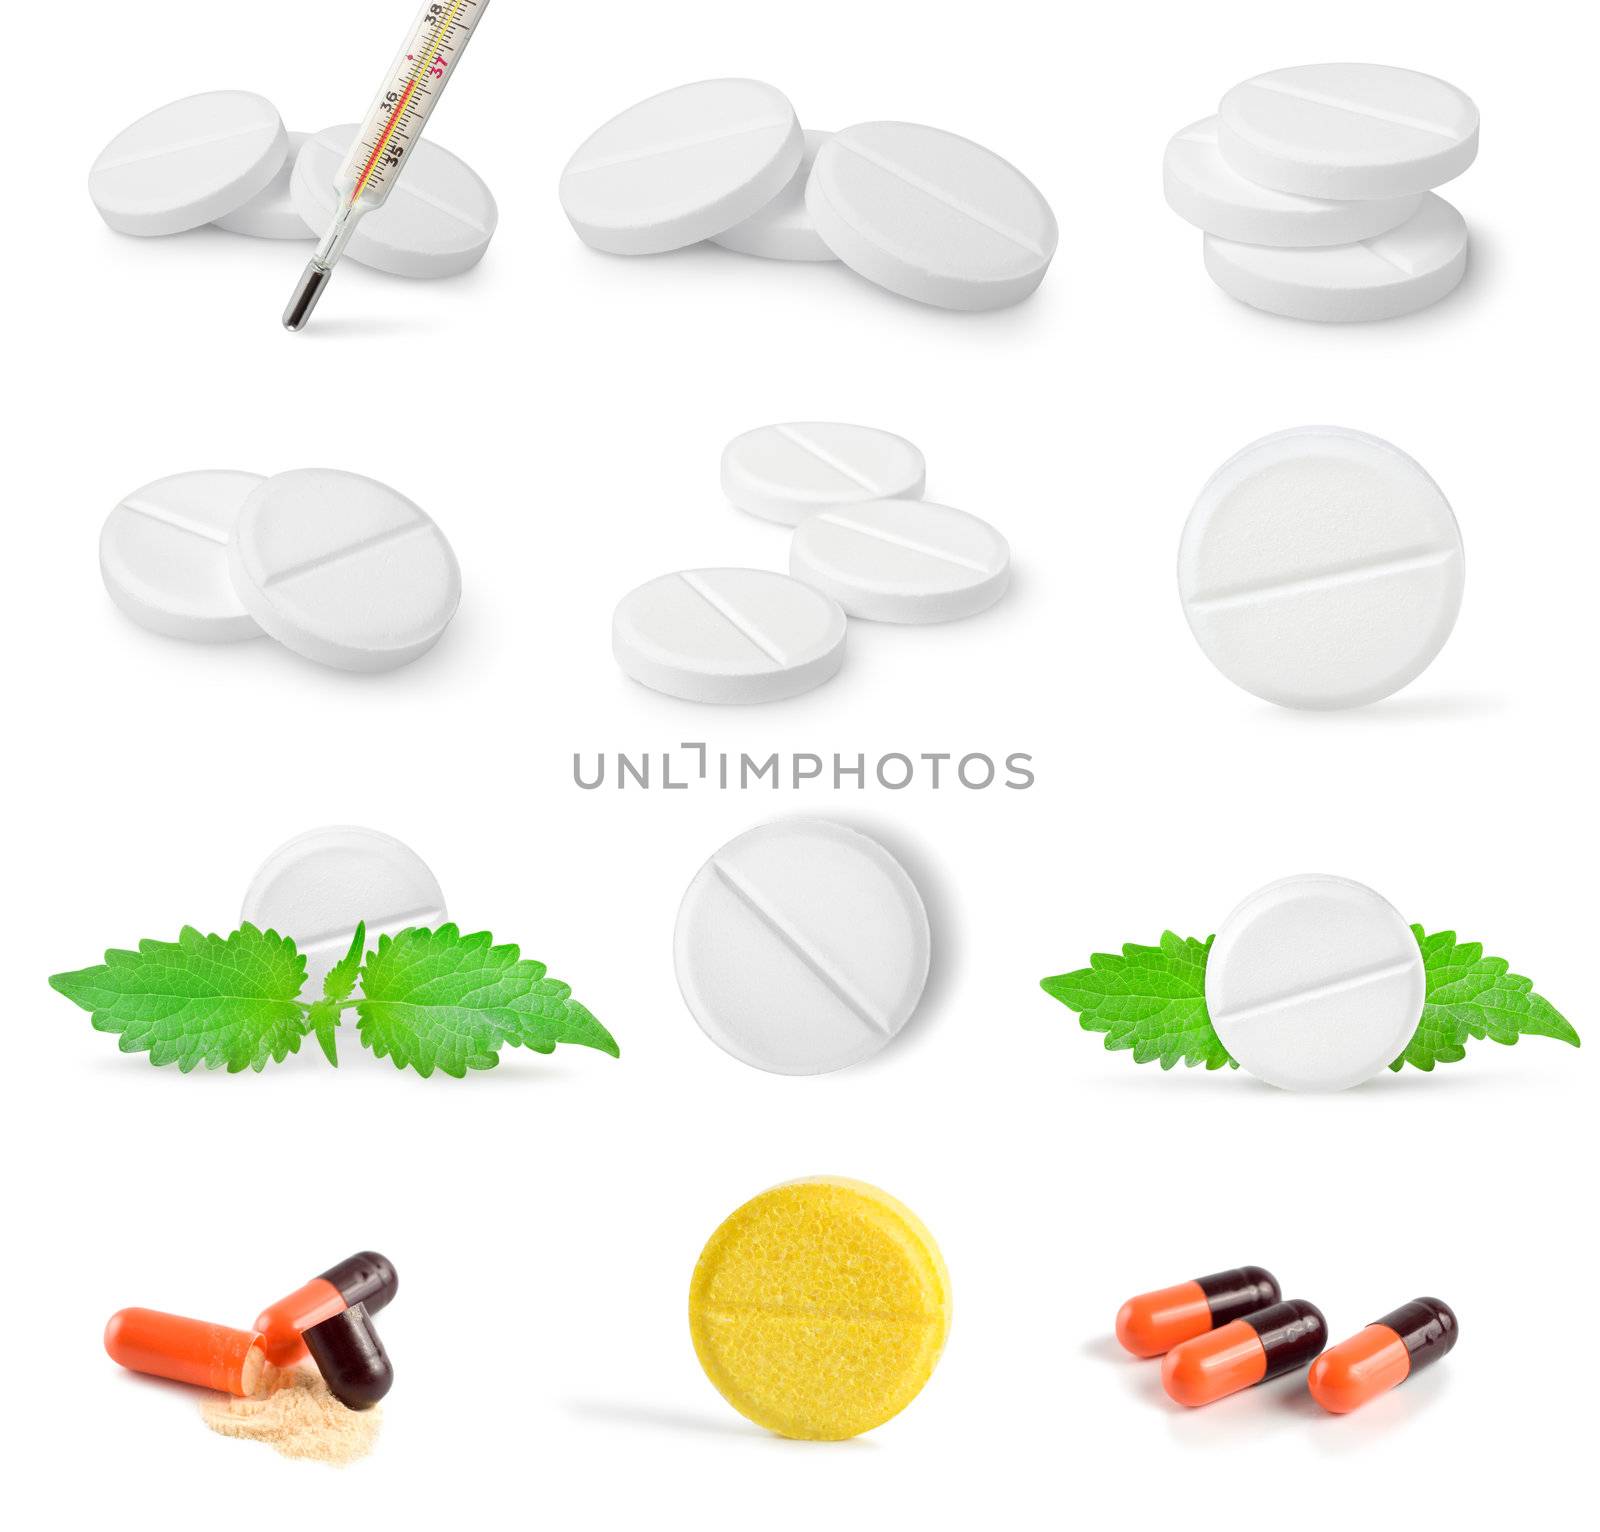 Collage of tablets by Givaga